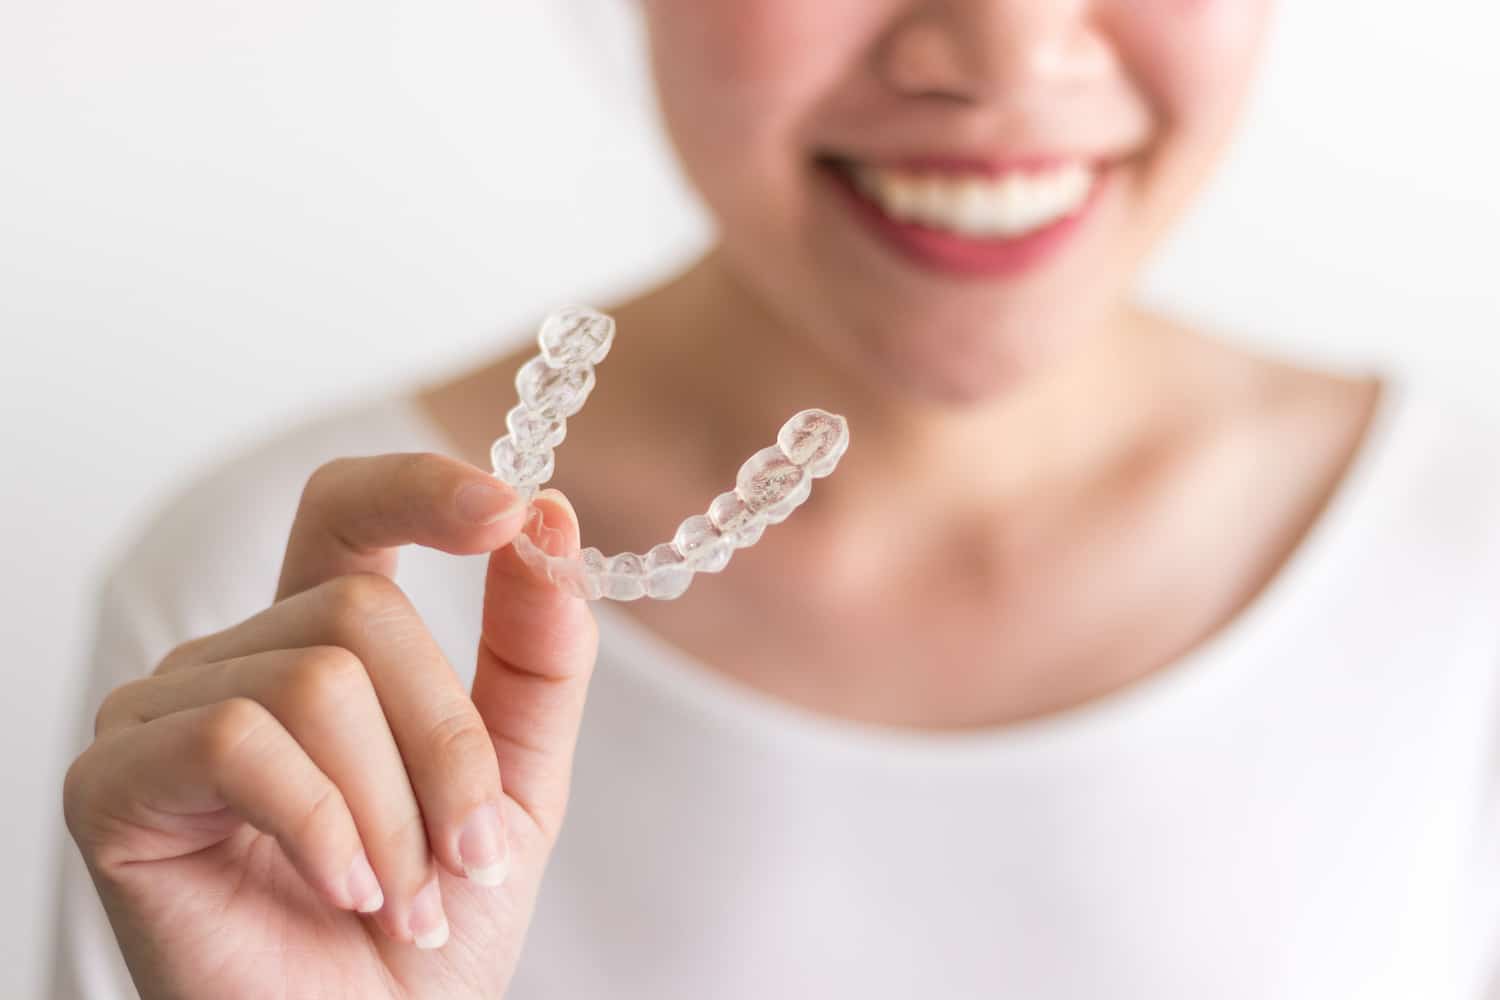 invisalign vs veneers woman smiling and holding out dental tray